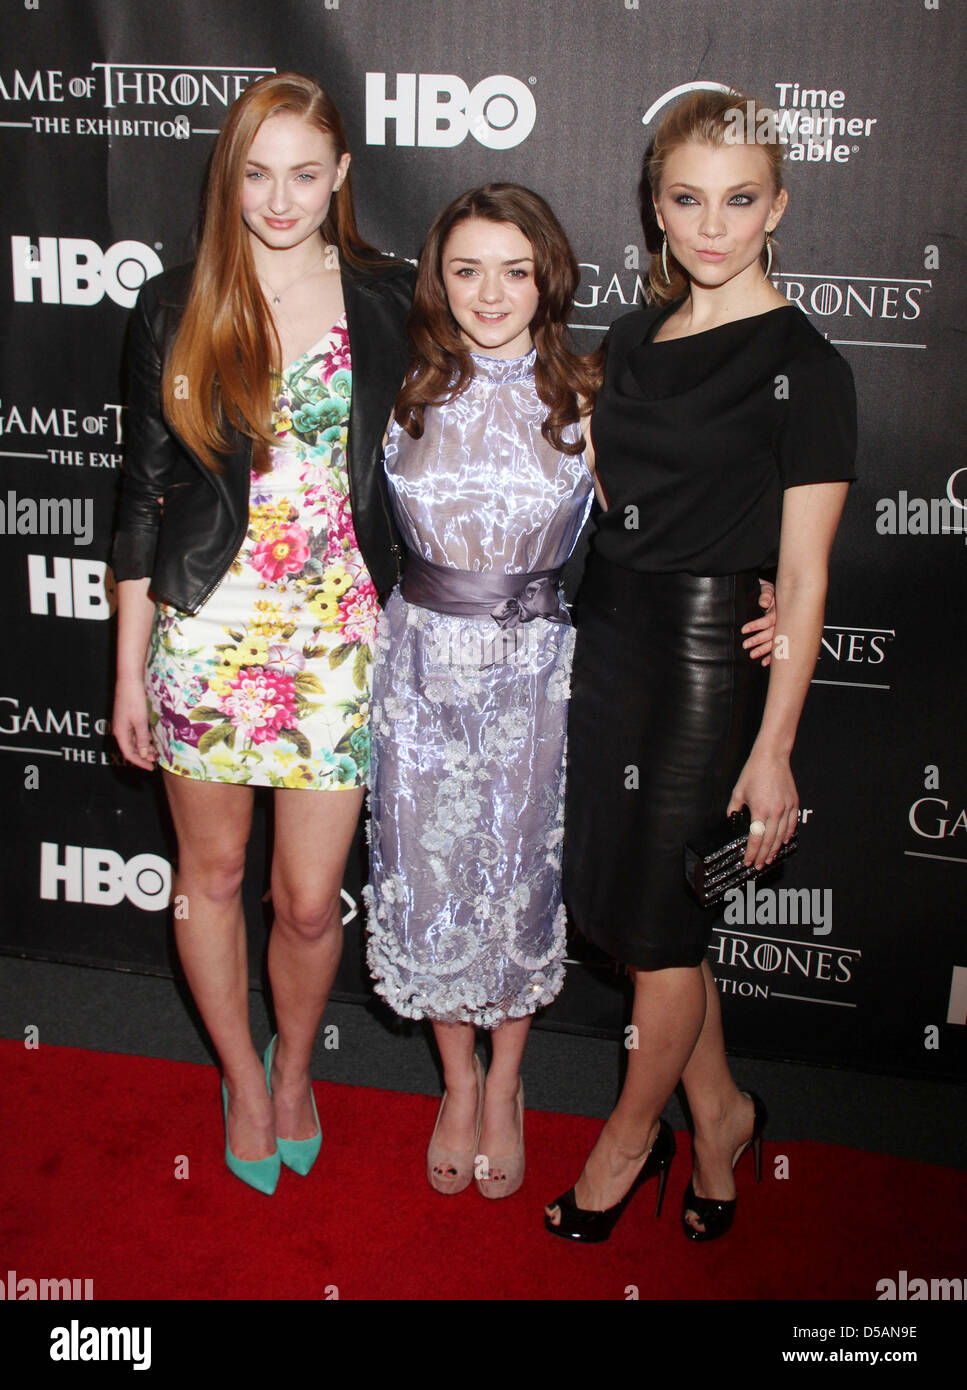 New York, USA. 27th March 2013. Actresses SOPHIE TURNER, MAISIE WILLIAMS and NATALIE DORMER attend the opening the installation of 'Game of Thrones: The Exhibition' held in midtown Manhattan. (Credit Image: Credit:  Nancy Kaszerman/ZUMAPRESS.com/Alamy Live News) Stock Photo